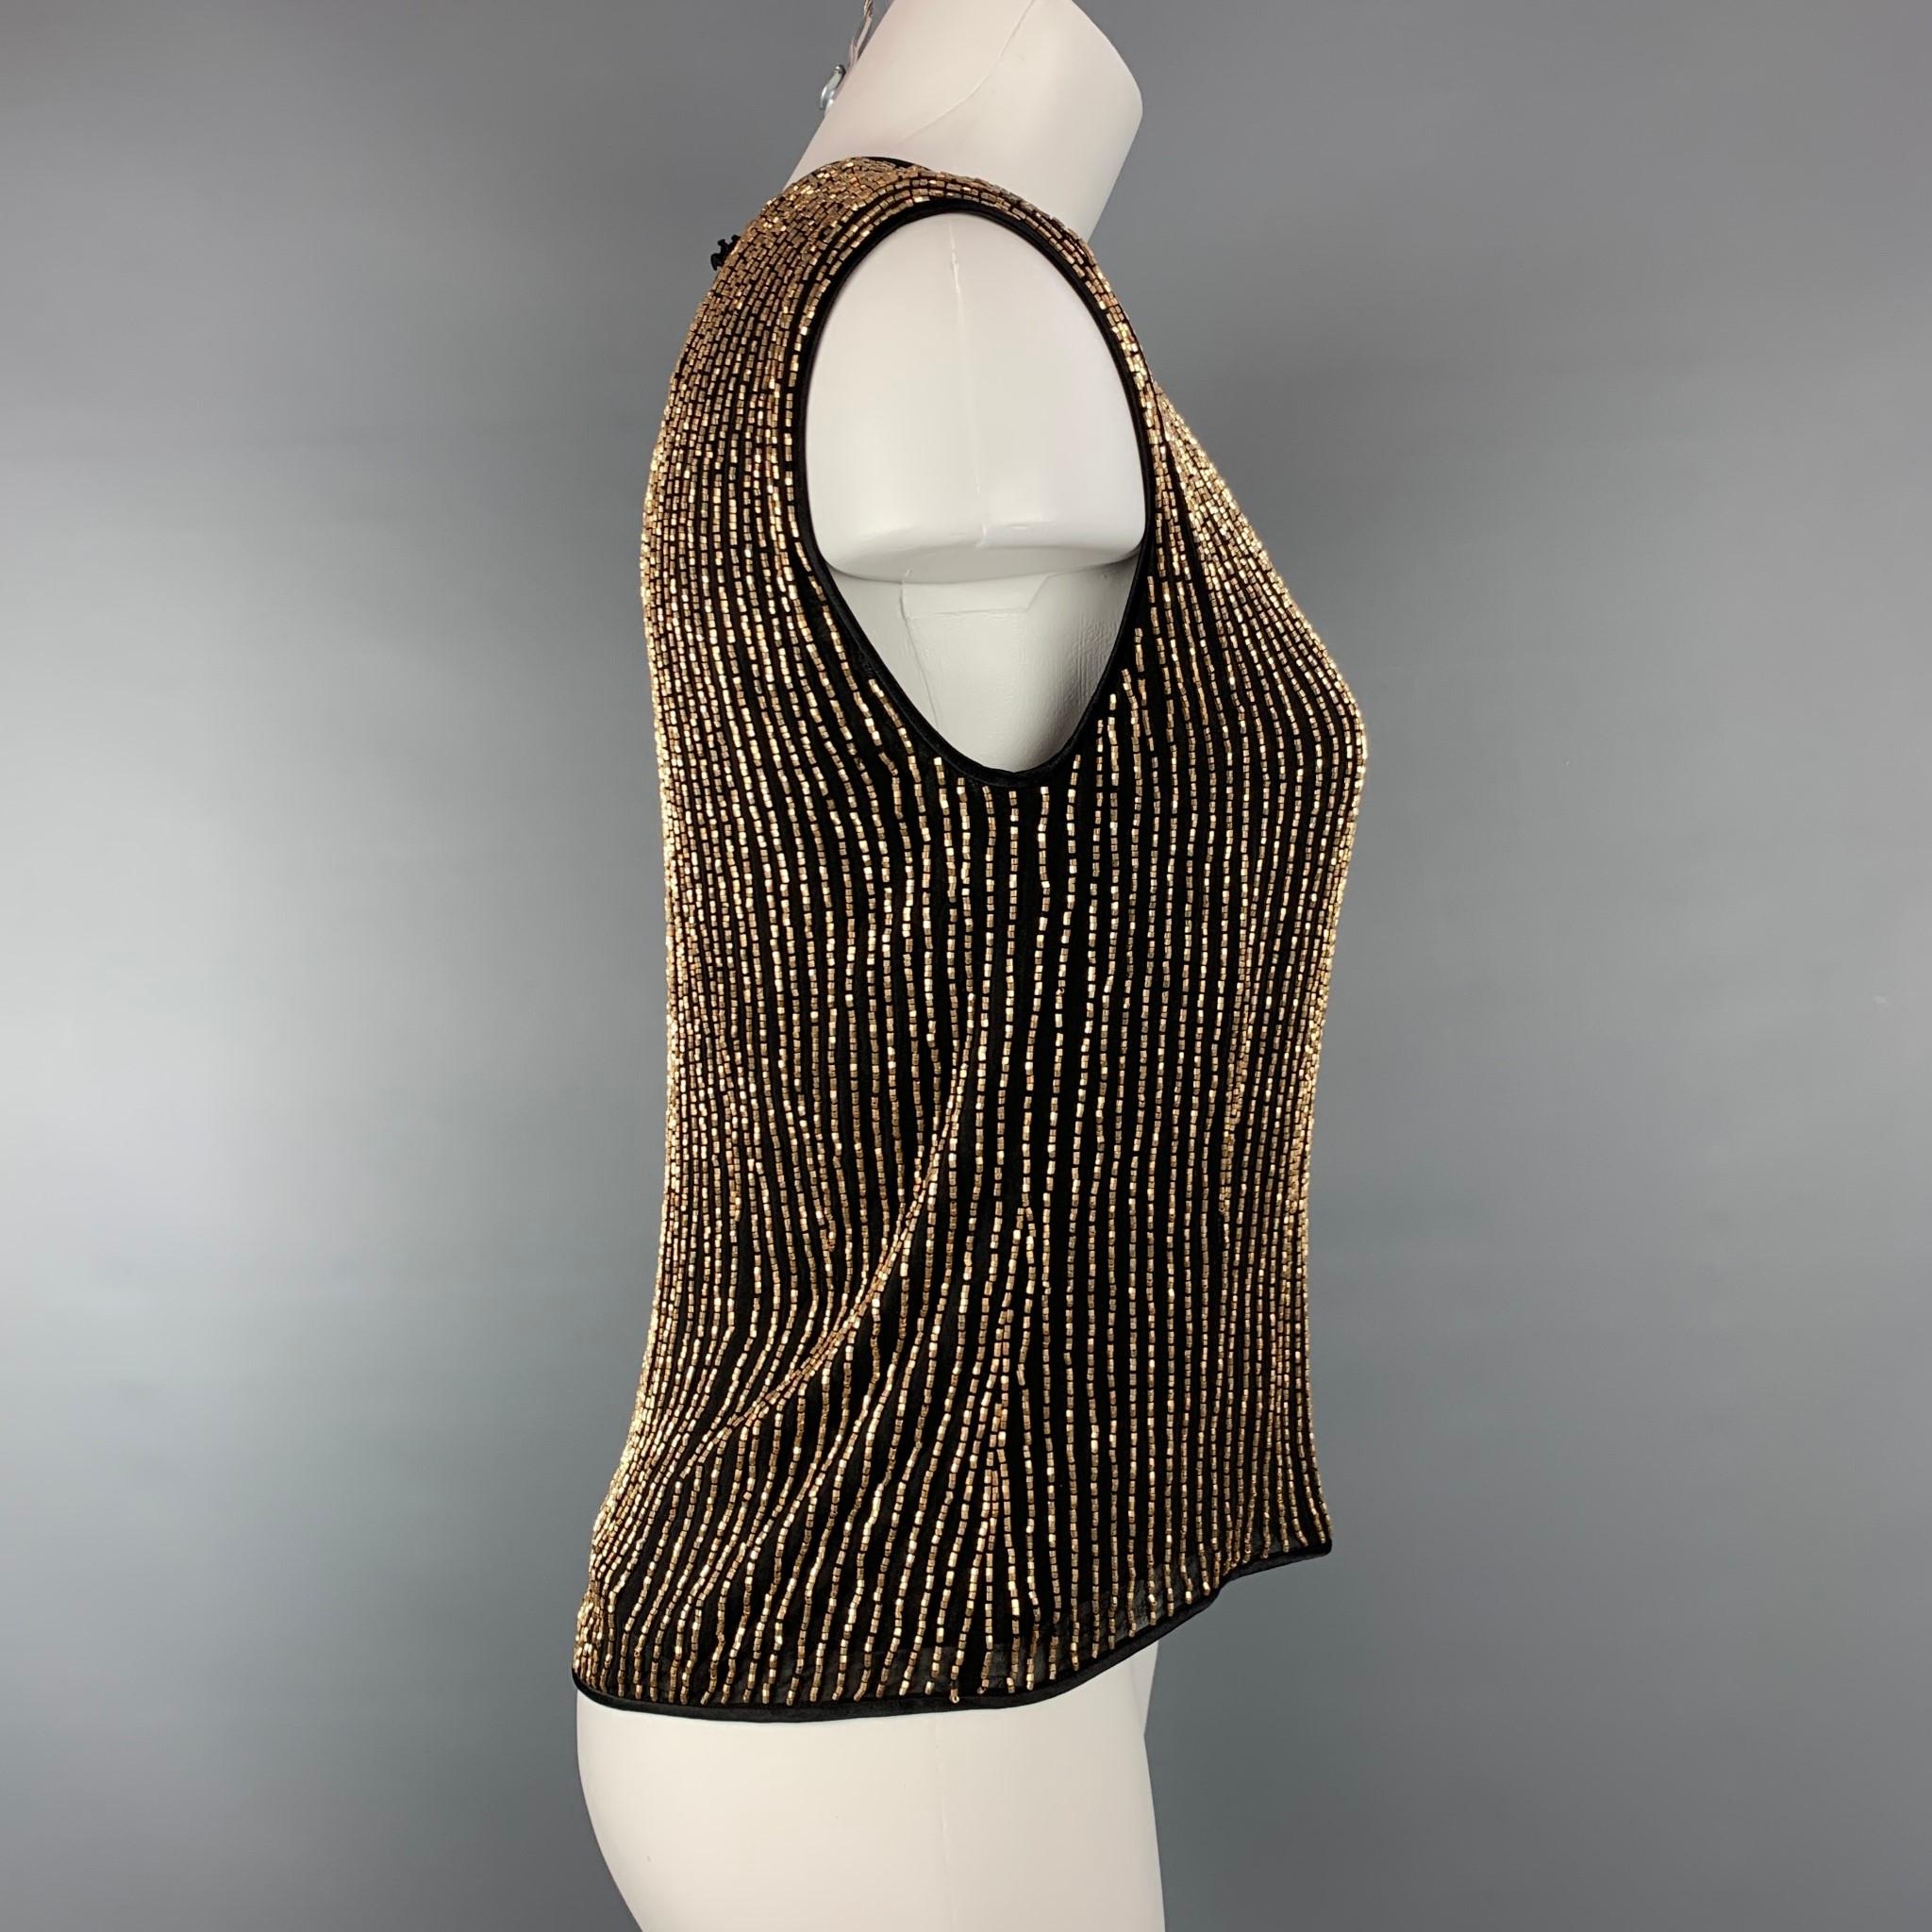 ESCADA COUTURE dress top comes in a black silk with a gold beaded design featuring a sleeveless style and a back single button closure. 

Very Good Pre-Owned Condition.
Marked: 36

Measurements:

Shoulder: 15 in.
Bust: 33 in.
Length: 20.5 in. 